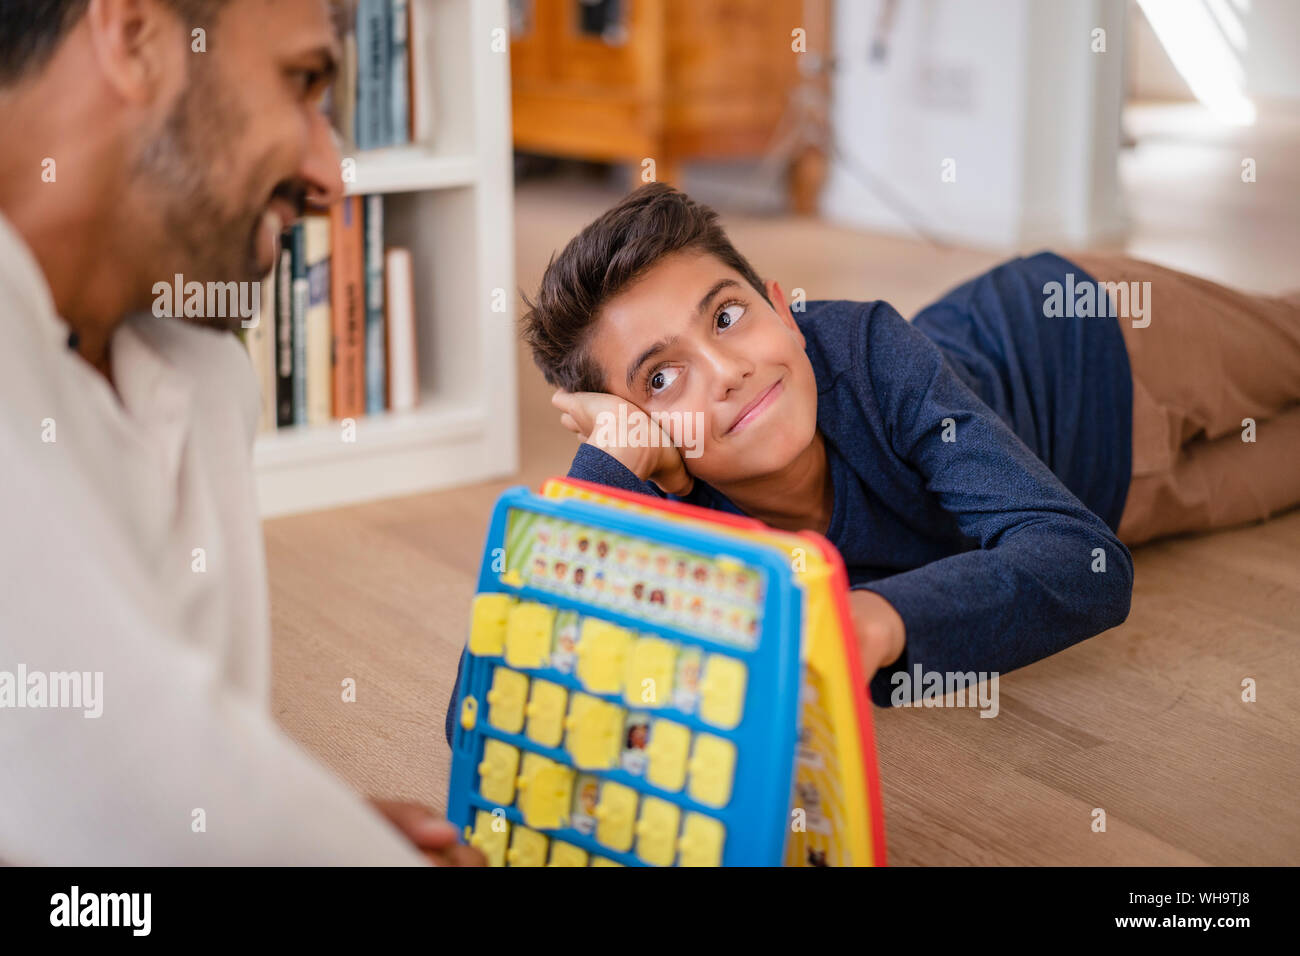 Father and son lying on the floor at home playing a game Stock Photo